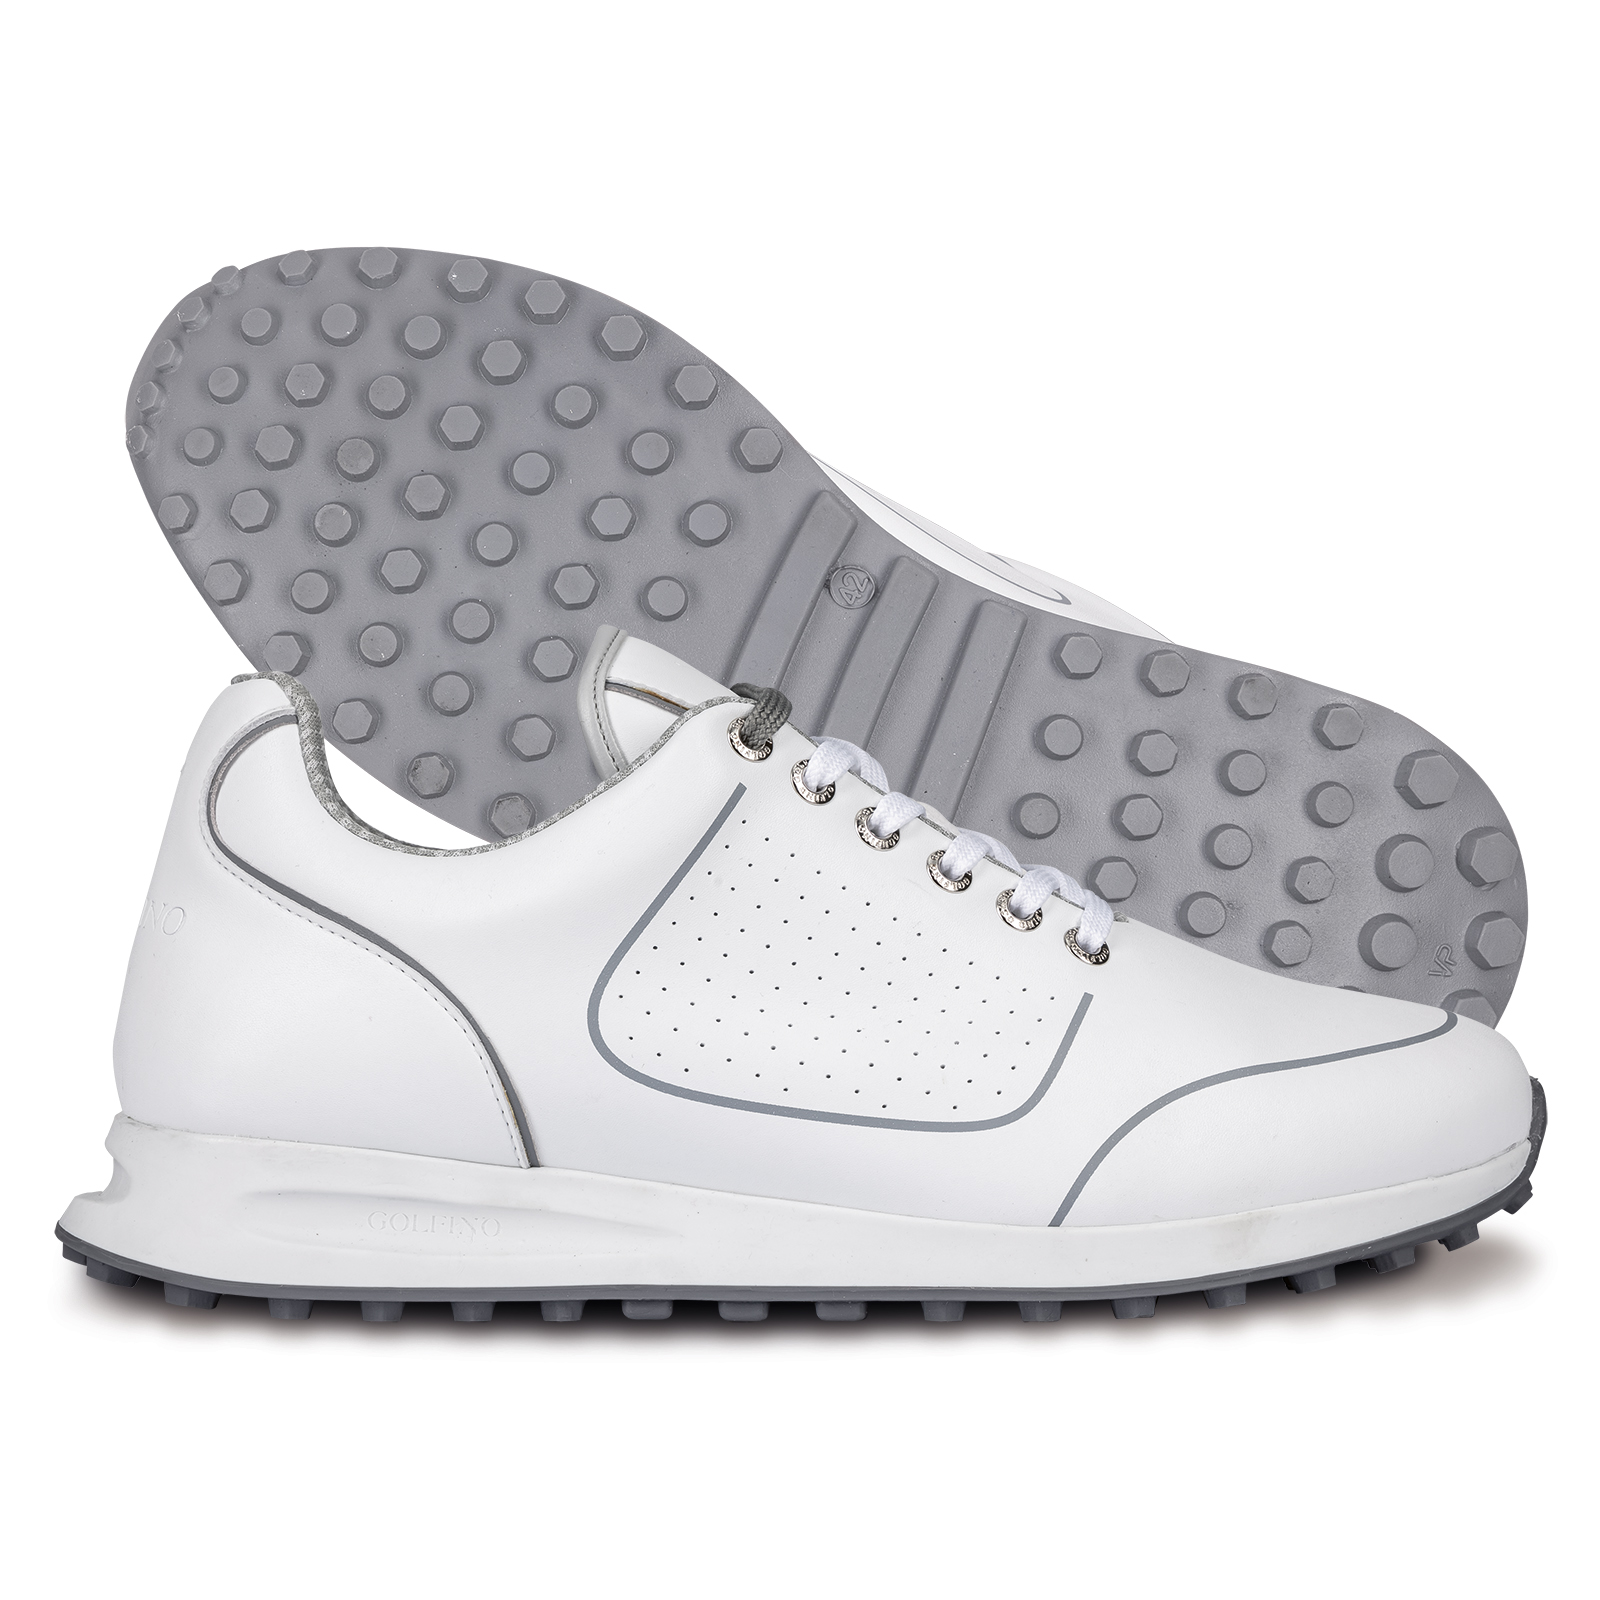 Sporty men's golf shoes made from easy to care for vegan leather